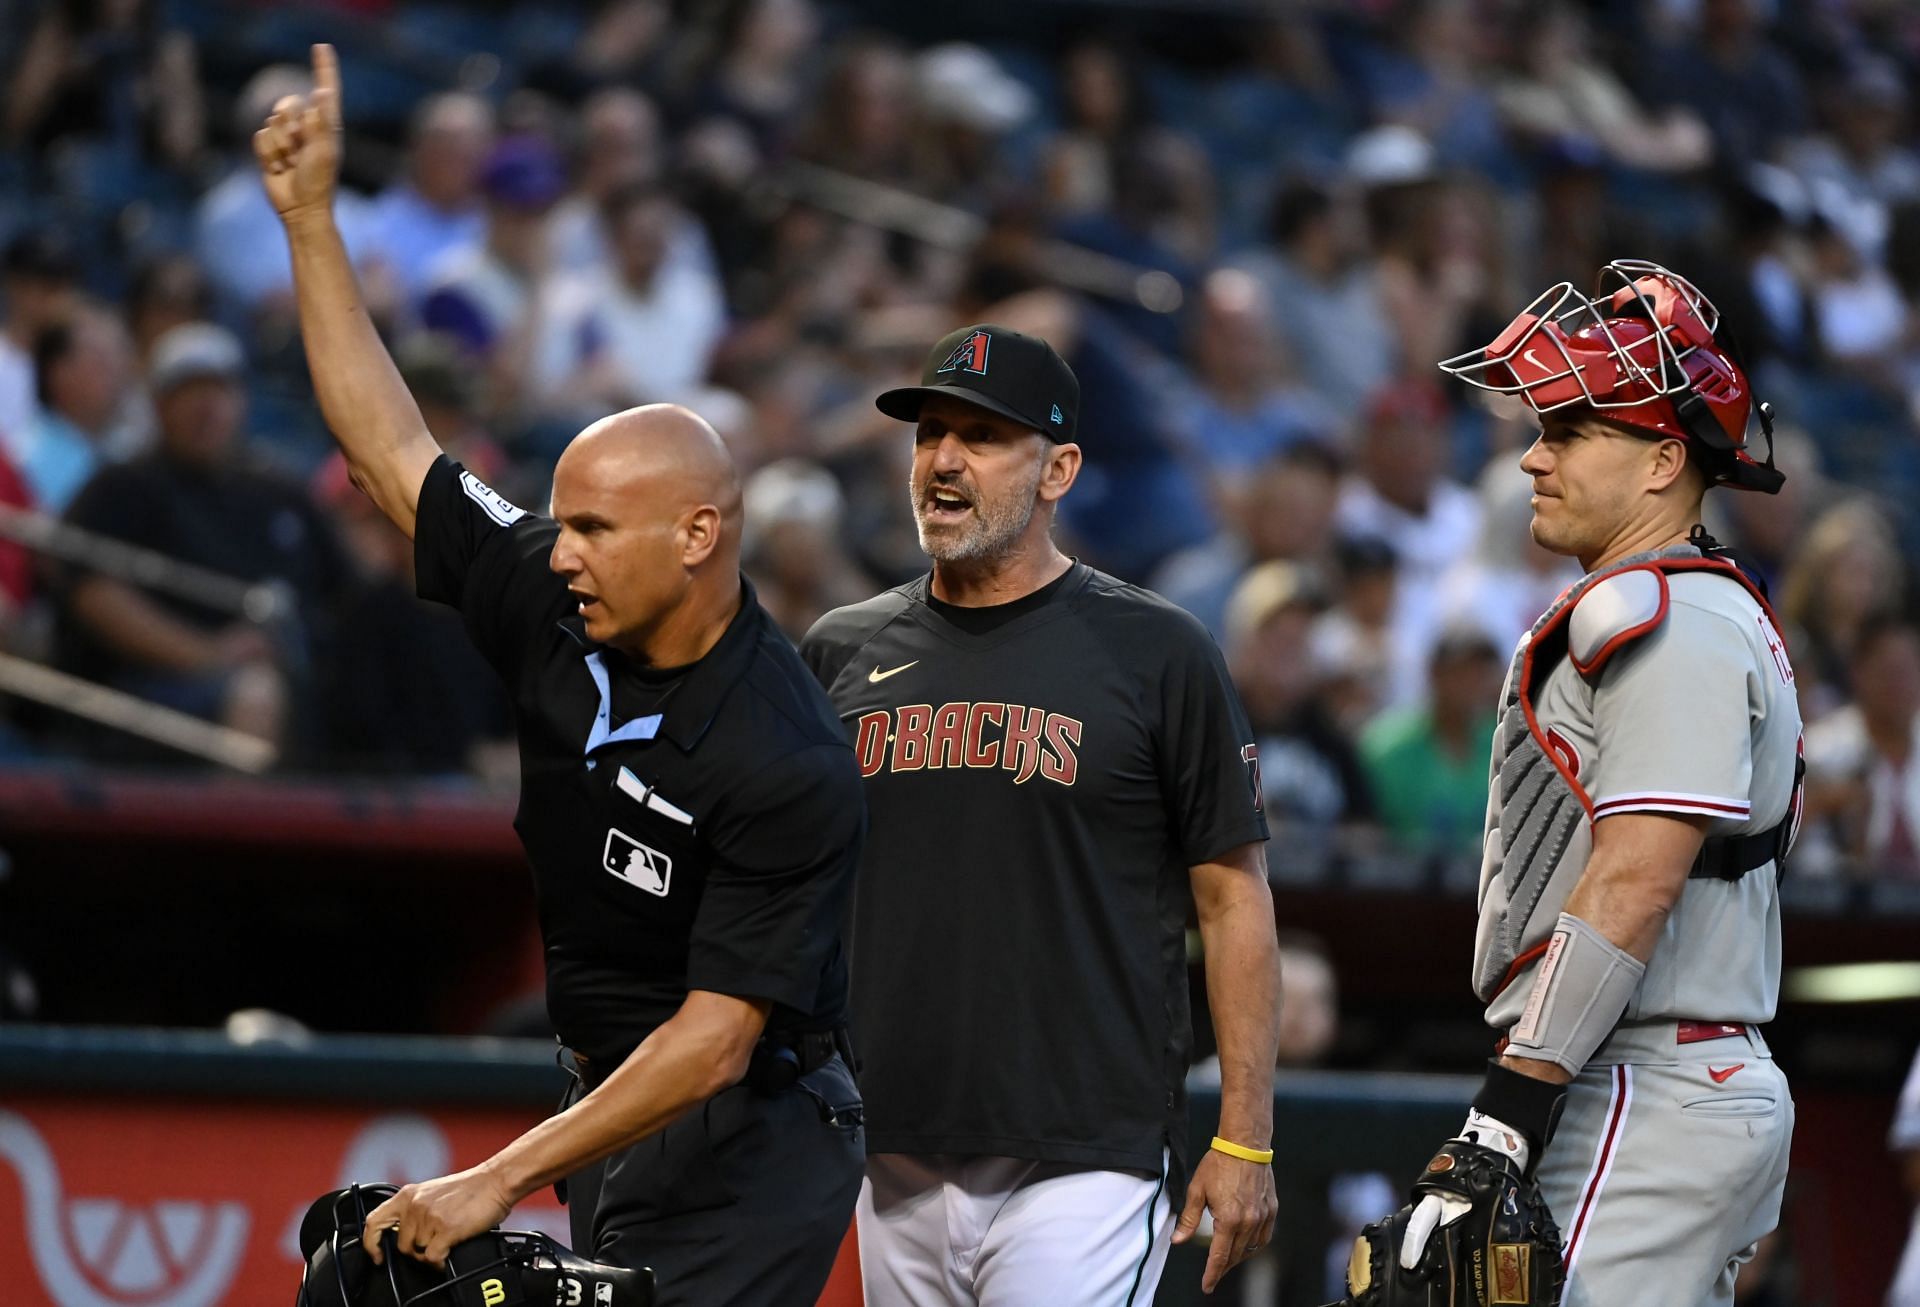 JT Realmuto and Torey Lovullo yelled at each other